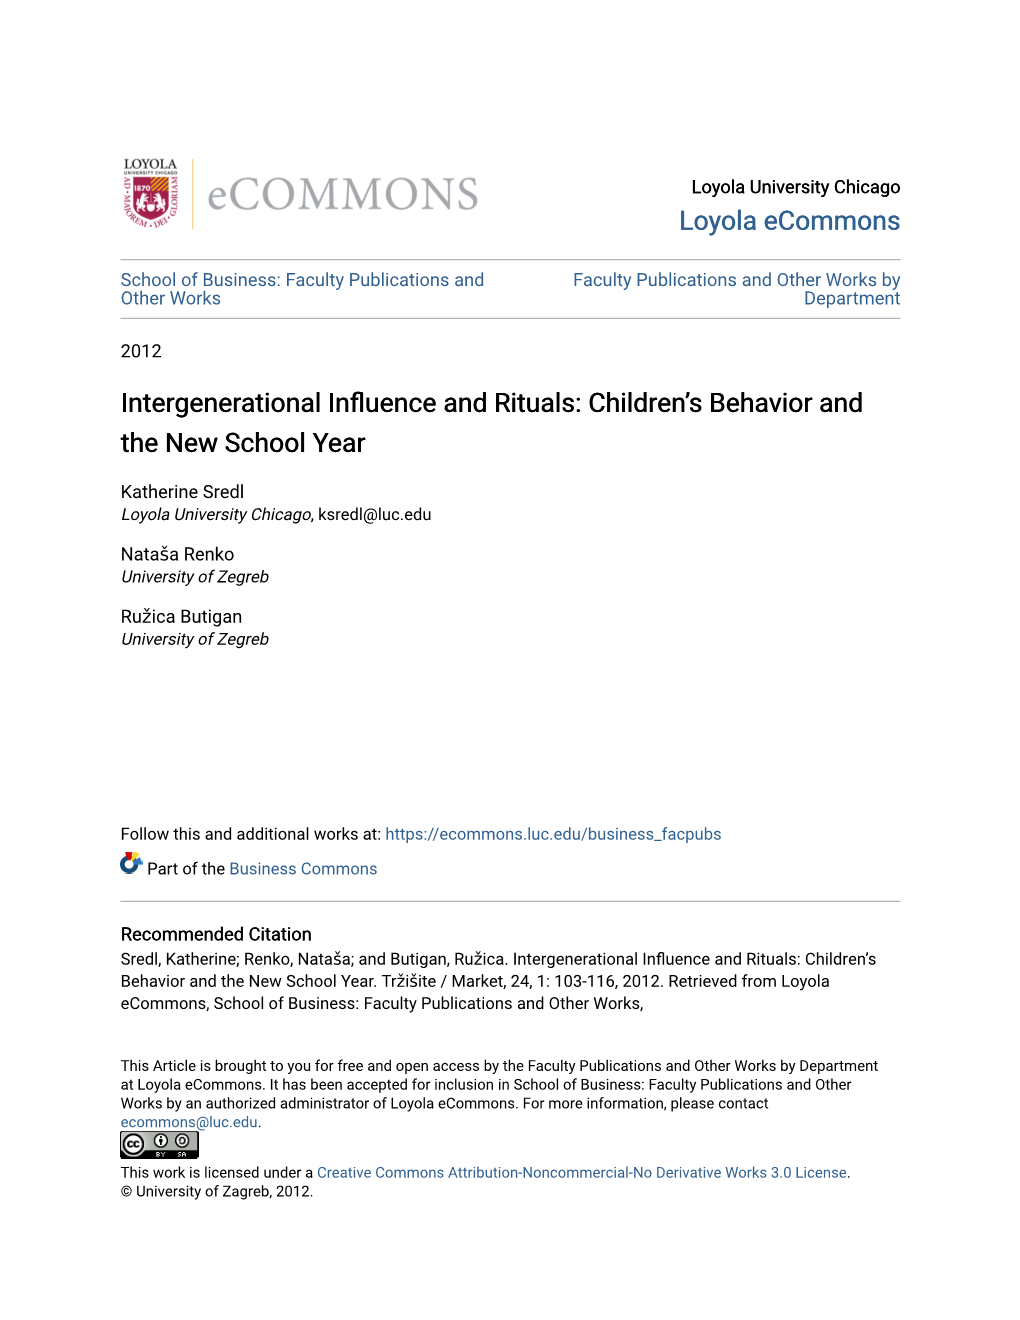 Intergenerational Influence and Rituals: Children’S Behavior and the New School Year